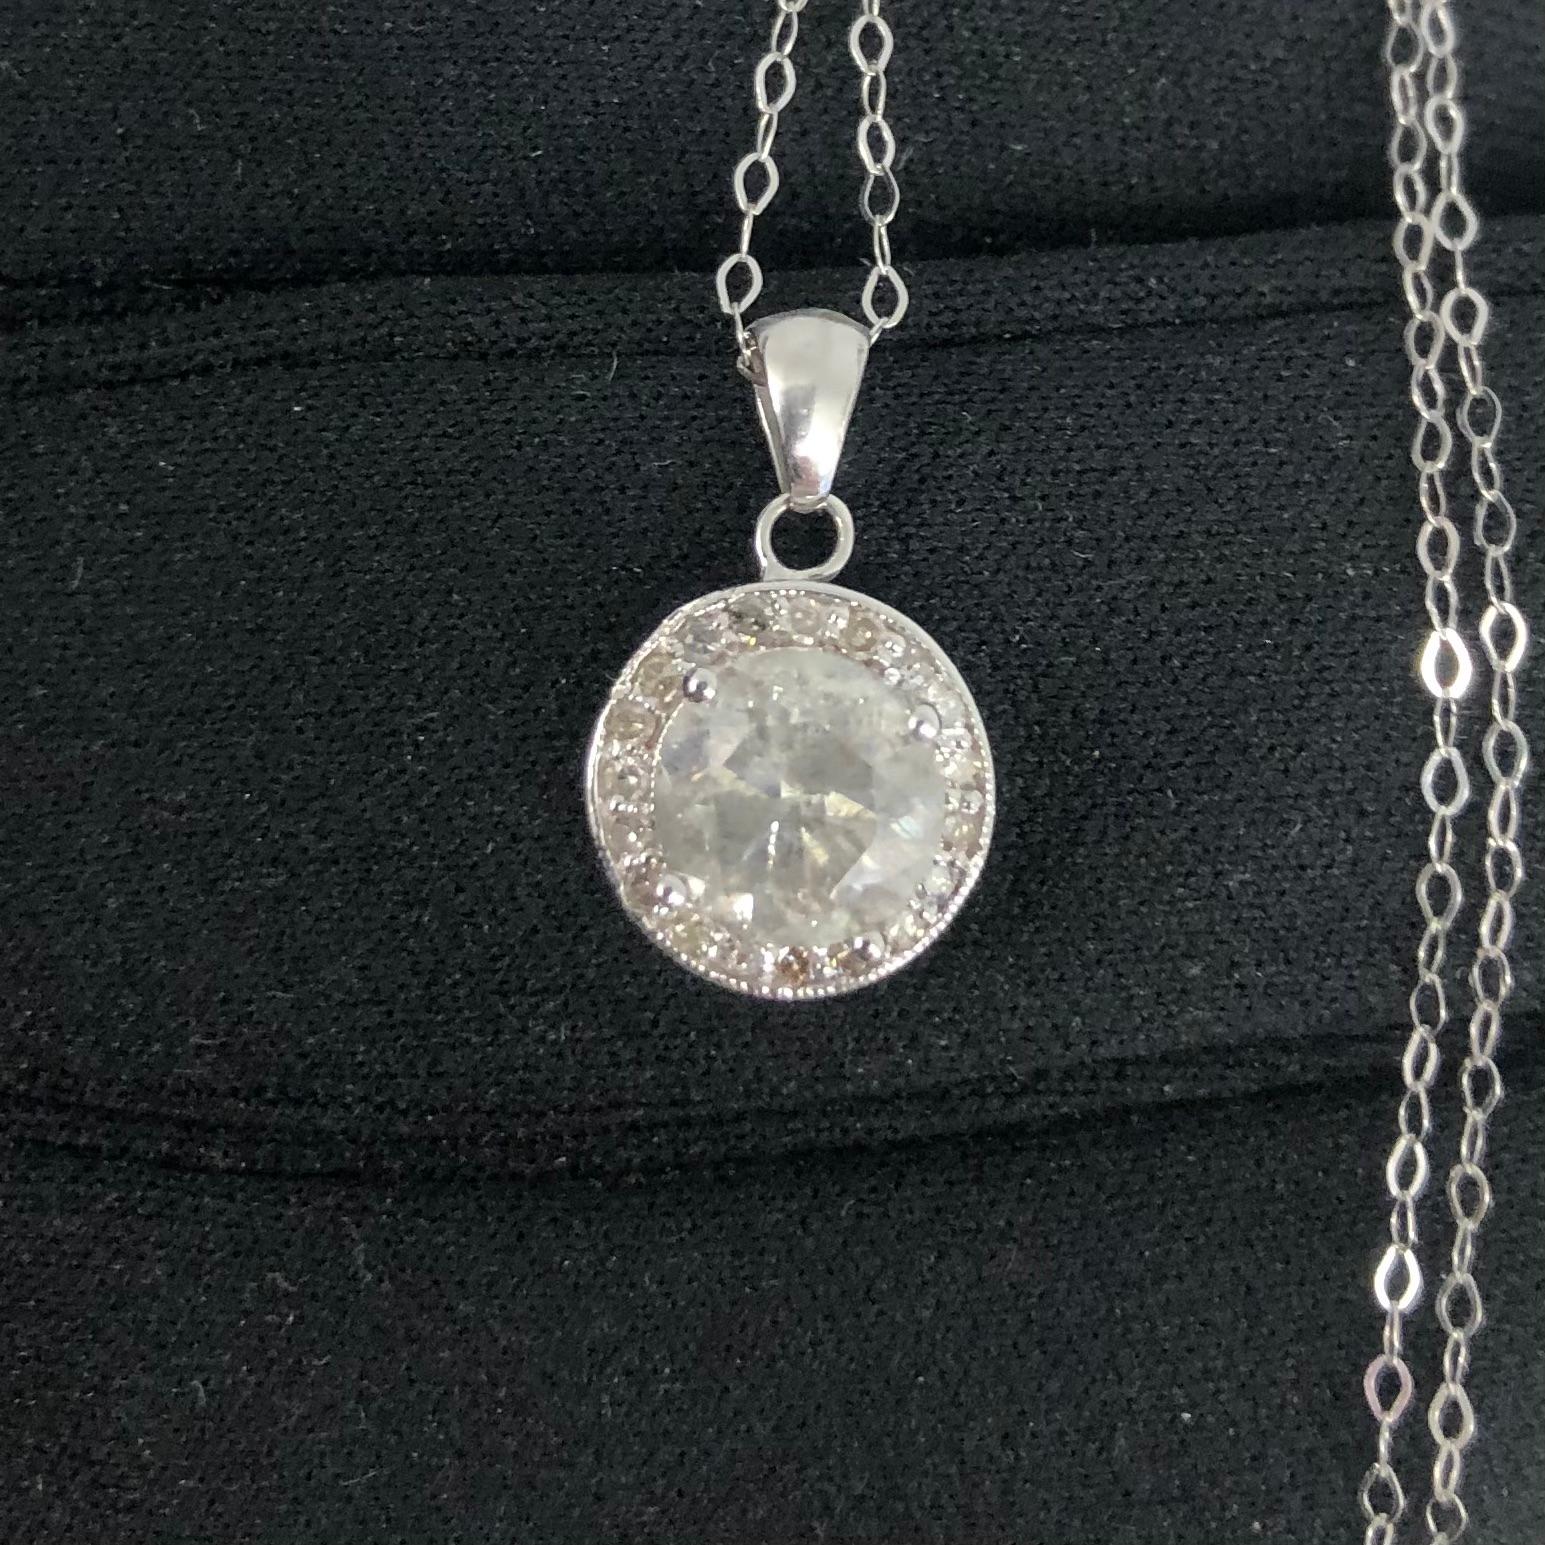 Opulent approx. 1.76 carat solitaire round diamond pendant in 14k white gold with necklace chain. A center brilliant round diamond weighing approx. 1.76 carats (natural earth-mined diamond enhanced) surrounded by approx. 1/3 carats of halo side